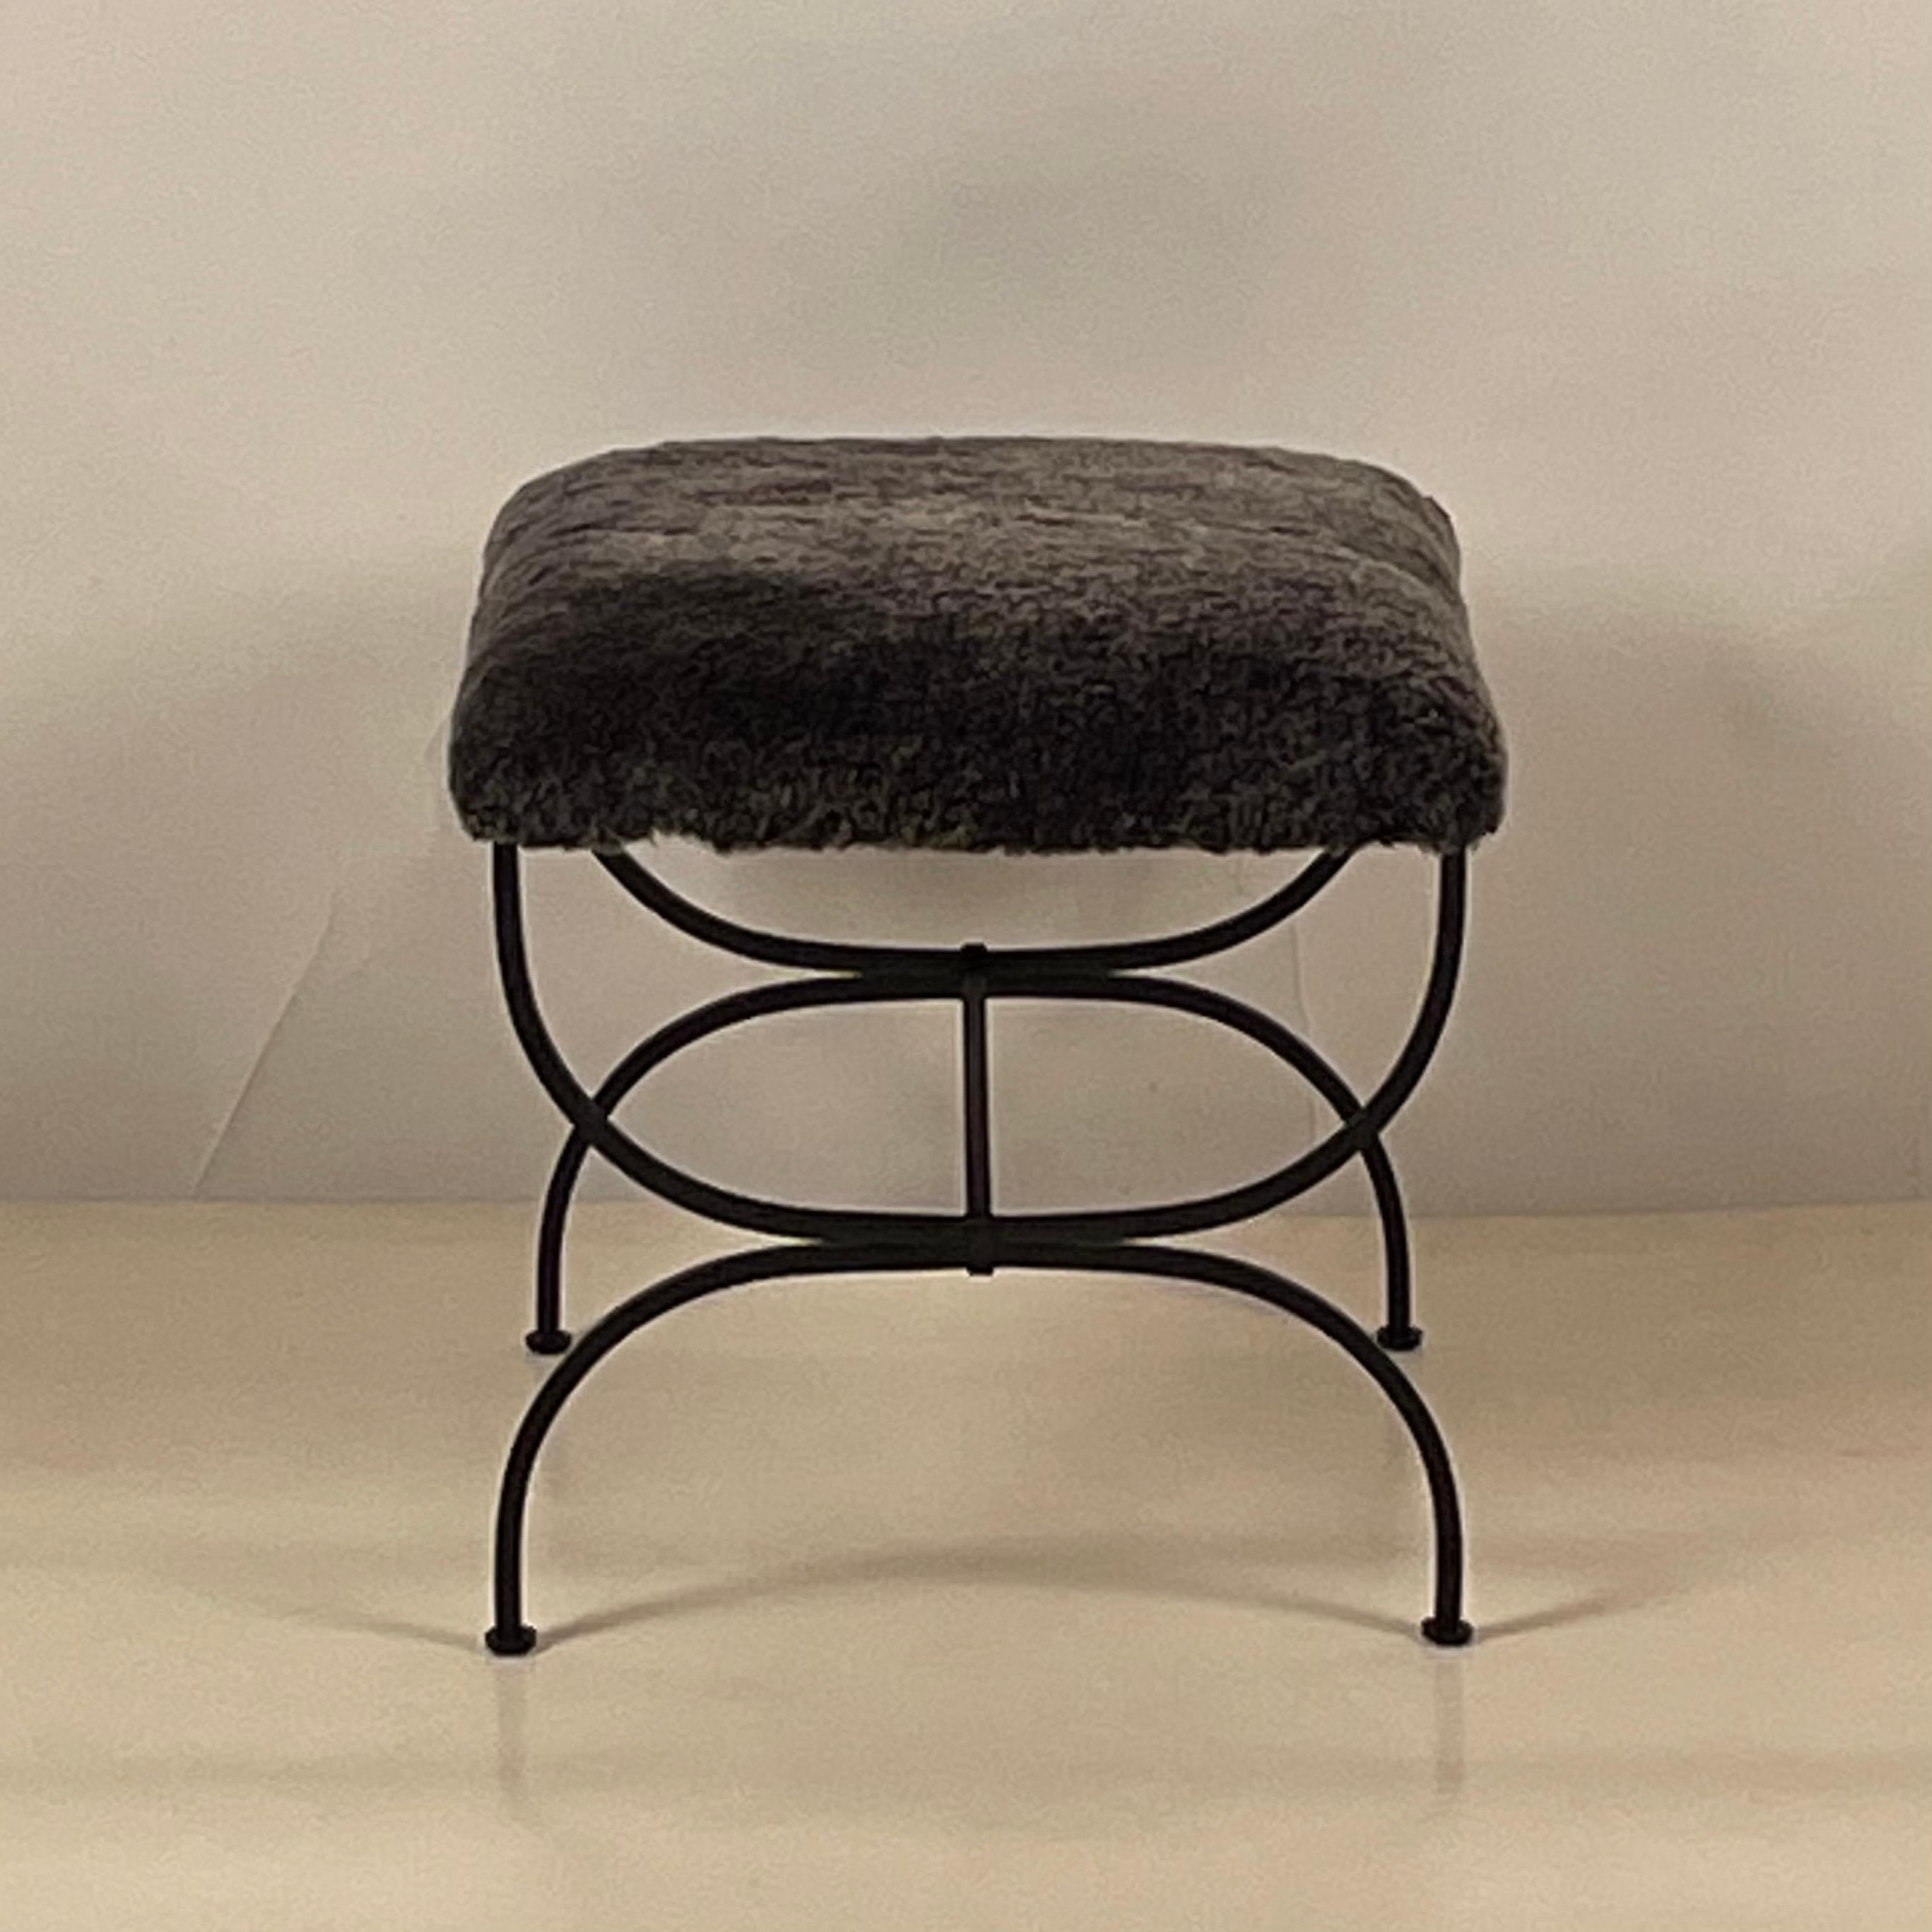 Grey fur 'Strapontin' stool by Design Frères.

Chic and understated.